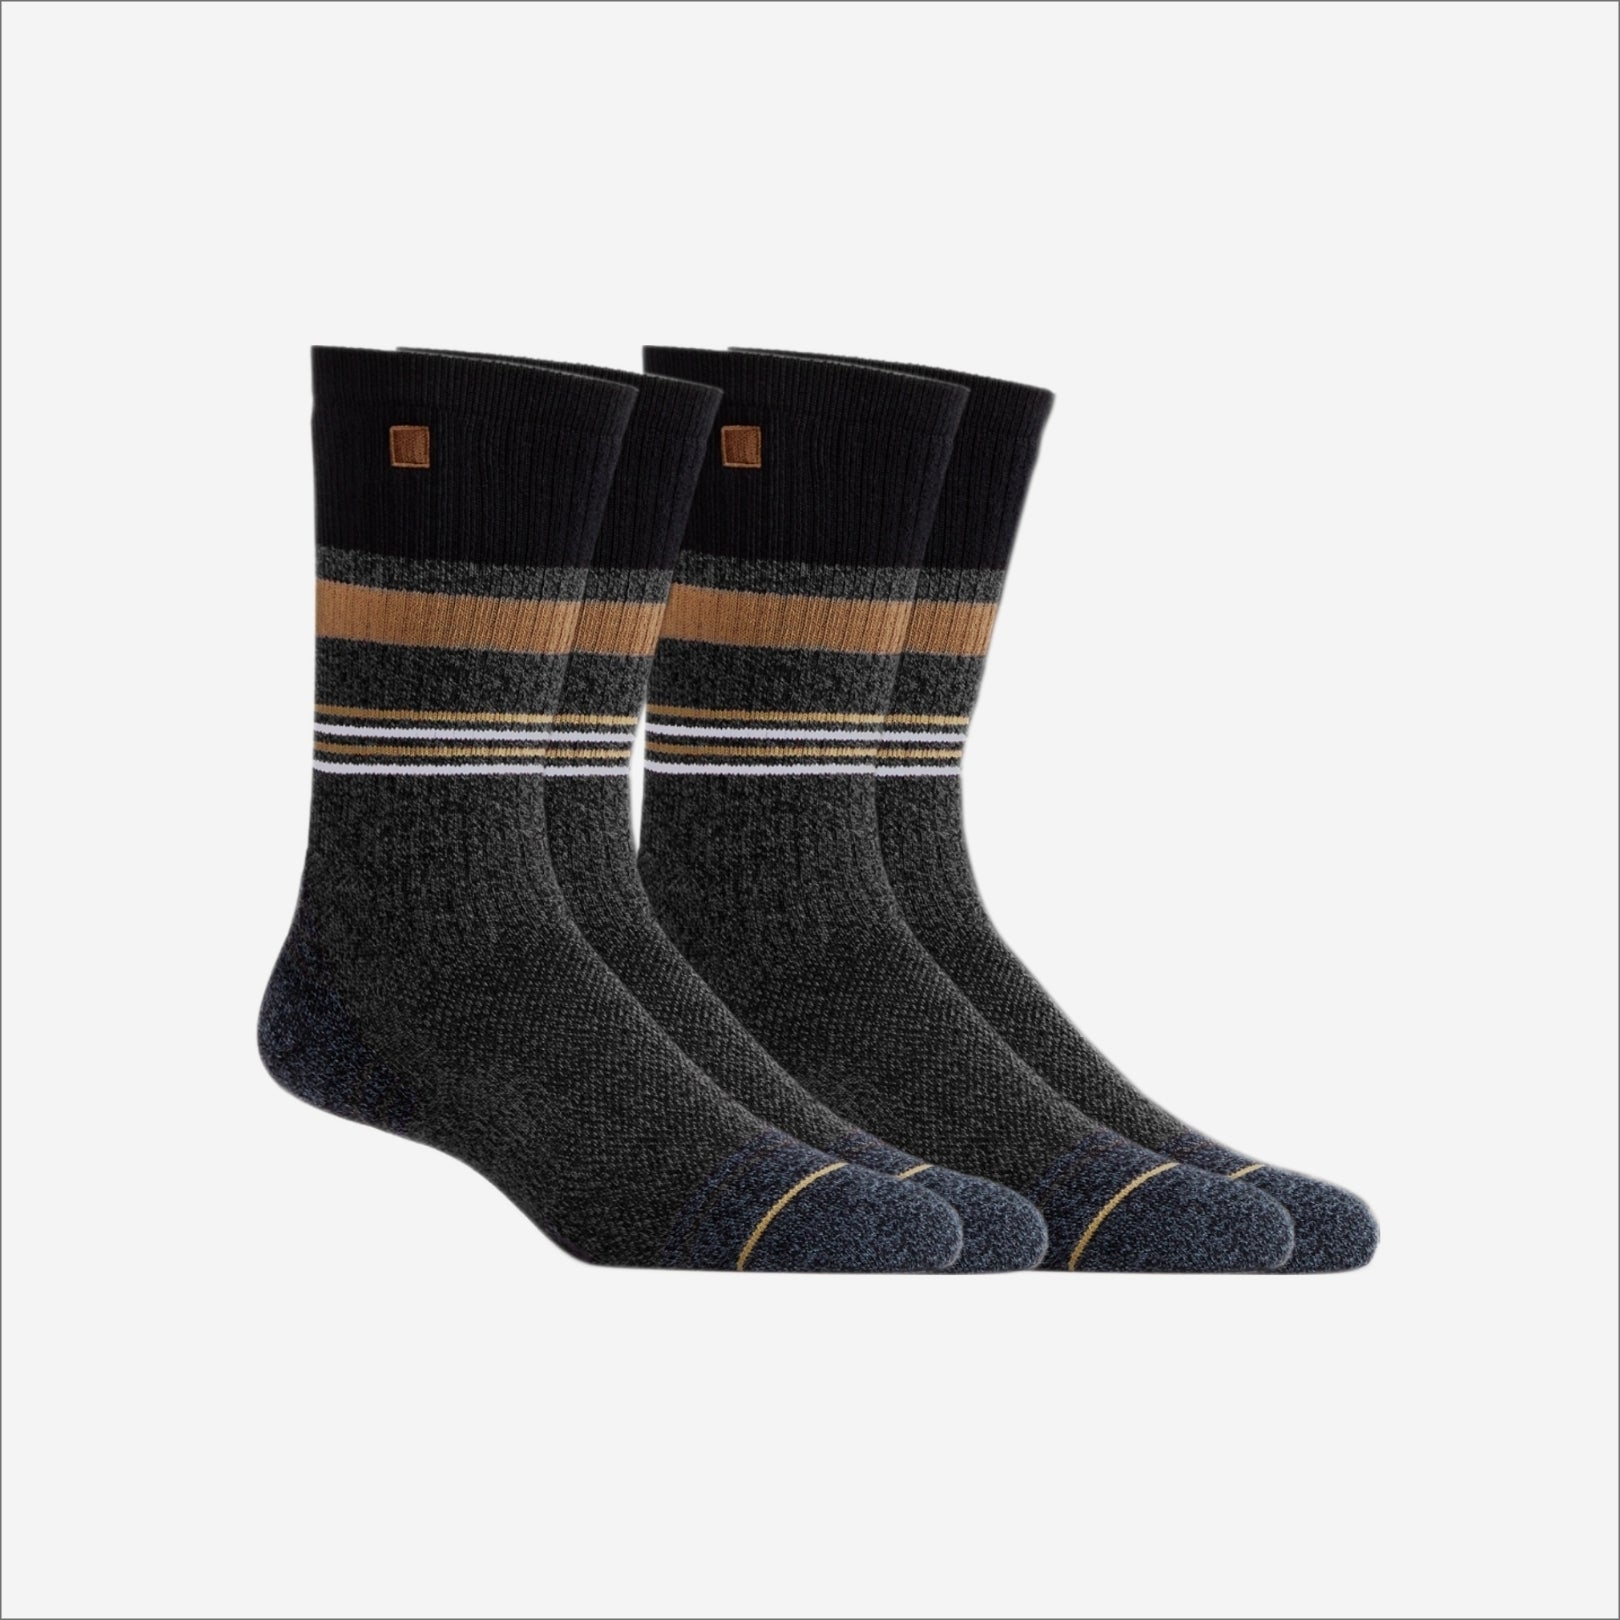 Best socks for men to wear with boots. 